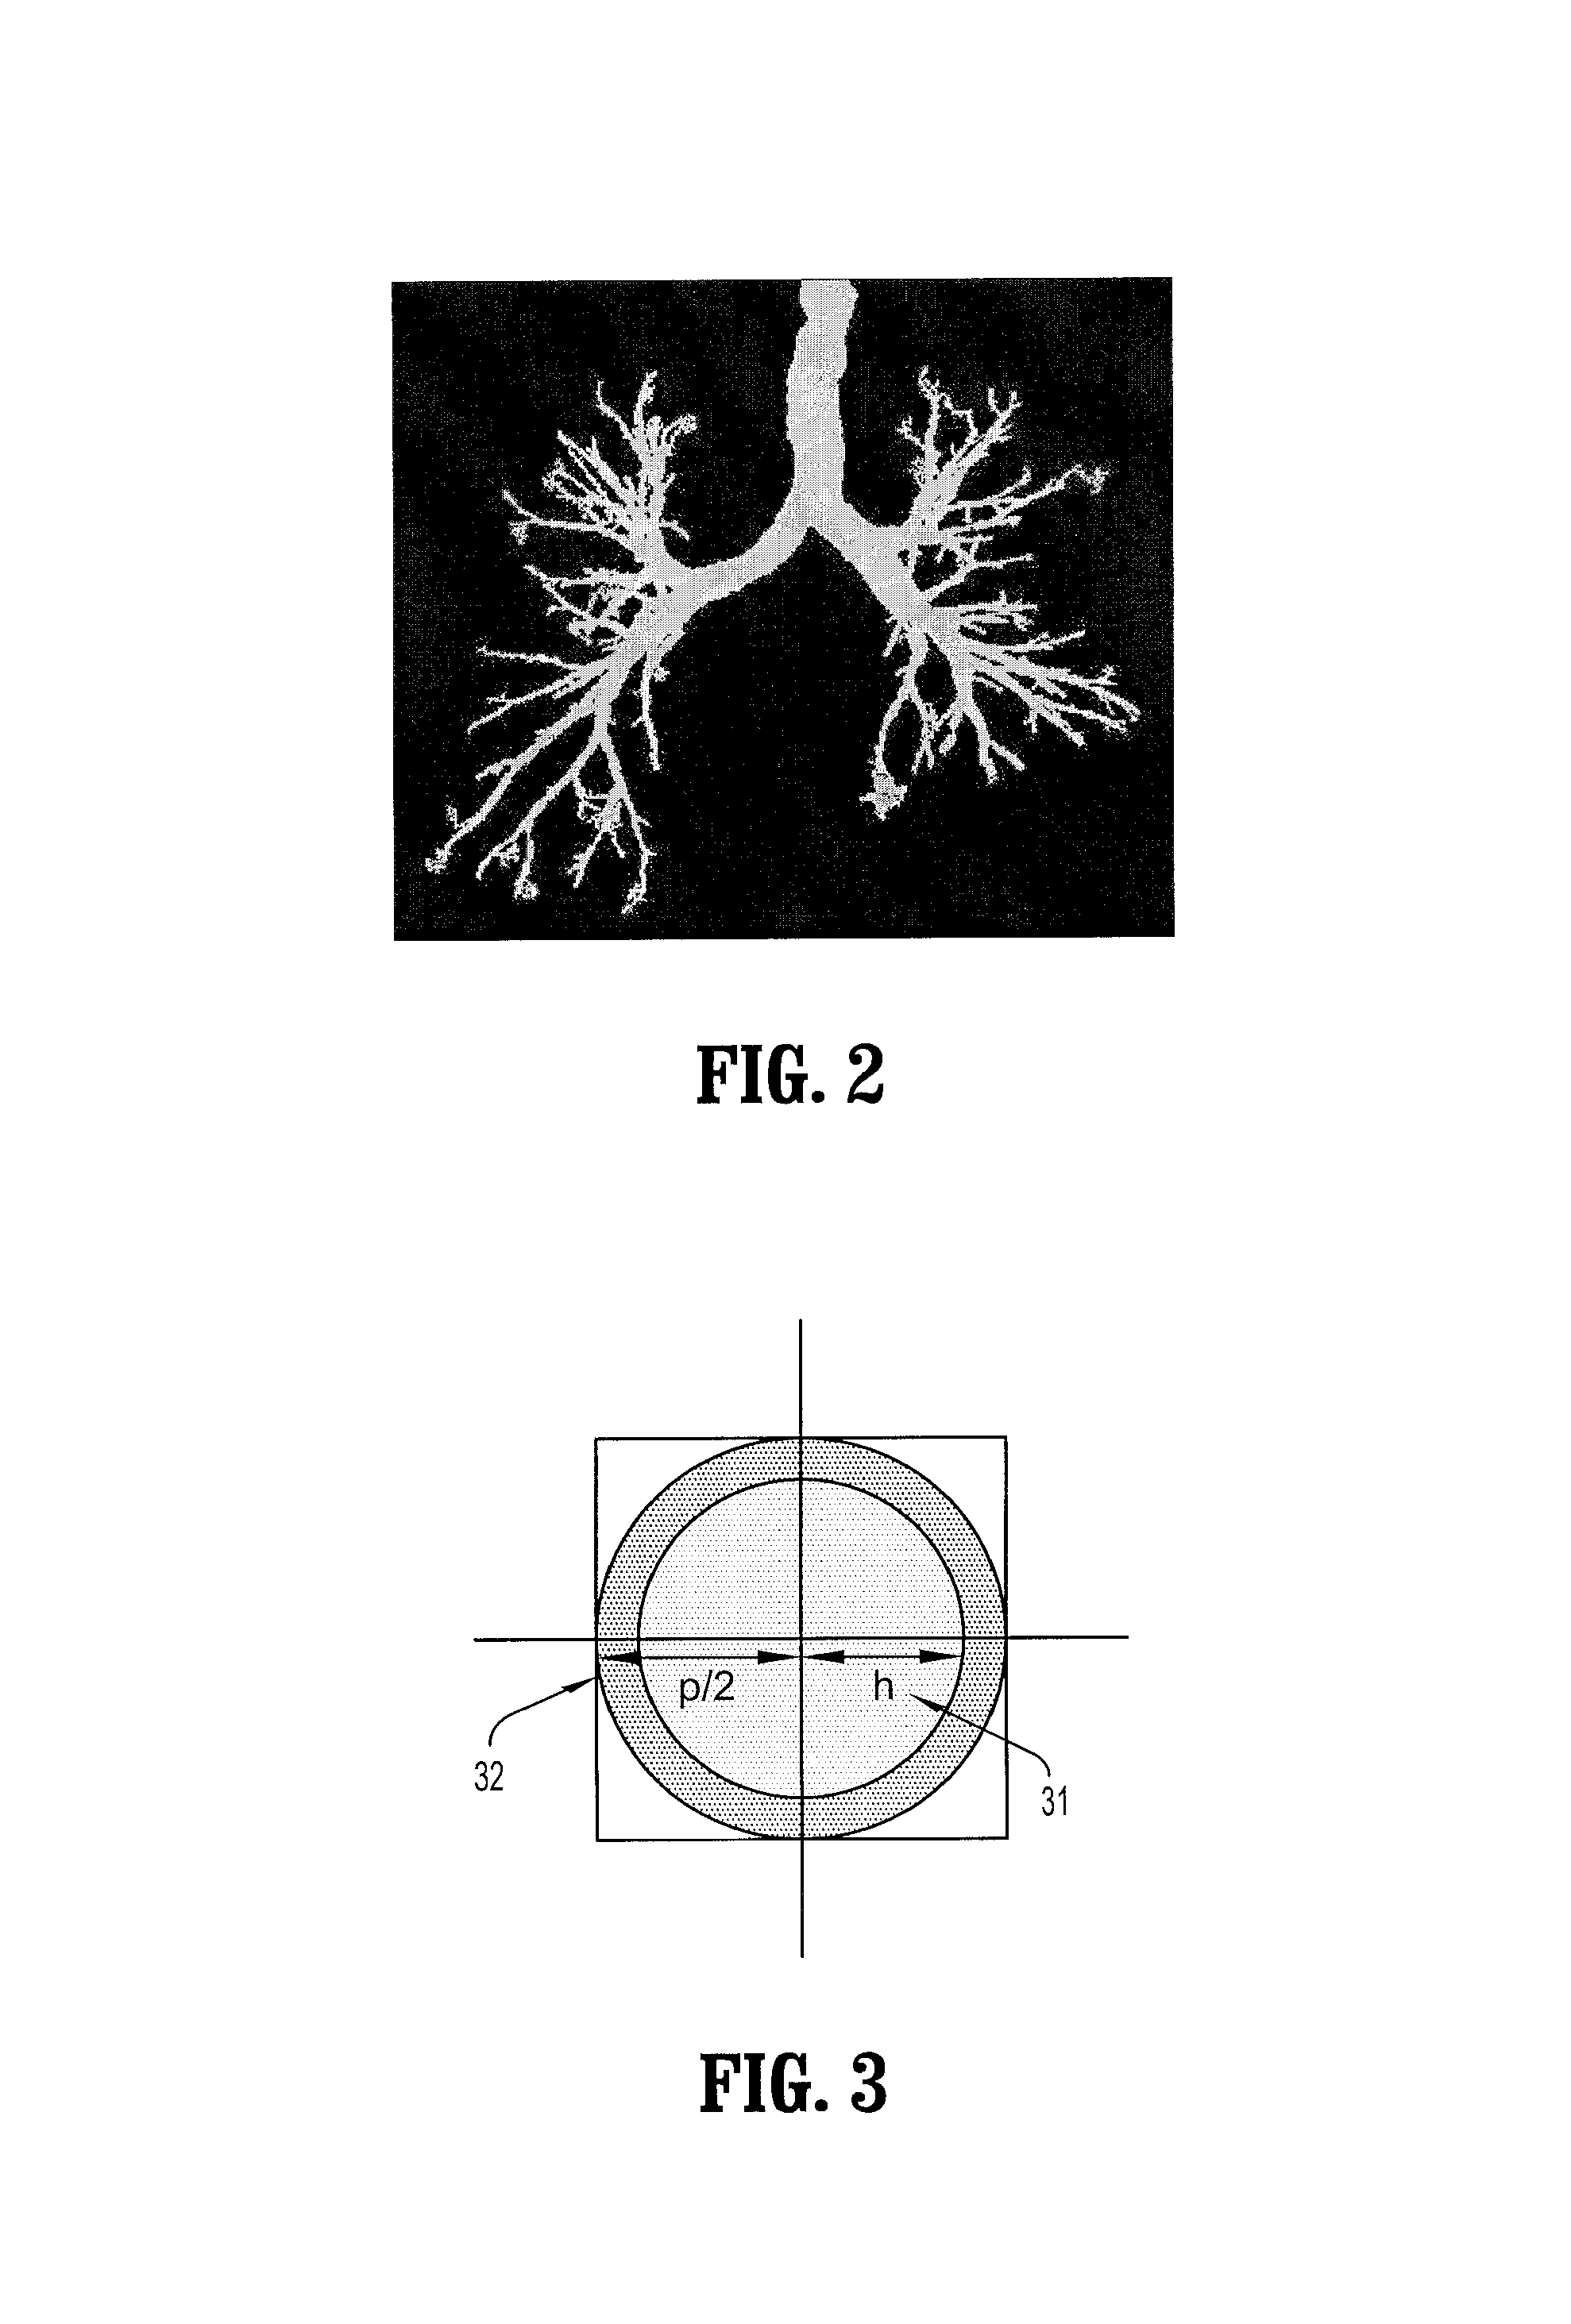 System and method for automated detection of mucus plugs within bronchial tree in MSCT images